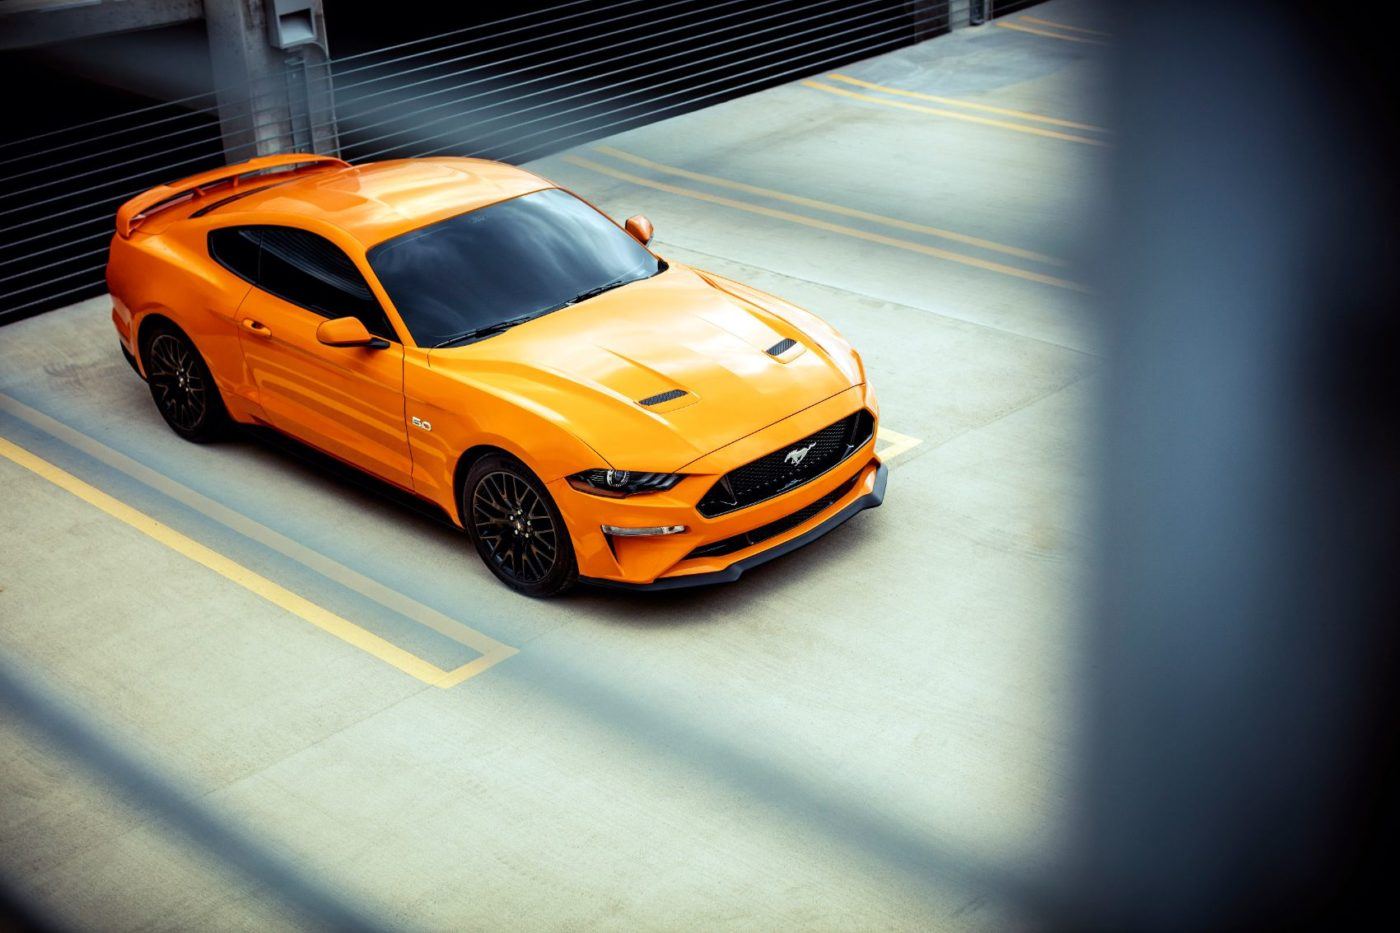 2018 Ford Mustang GT in Orange Fury with Performance Pack